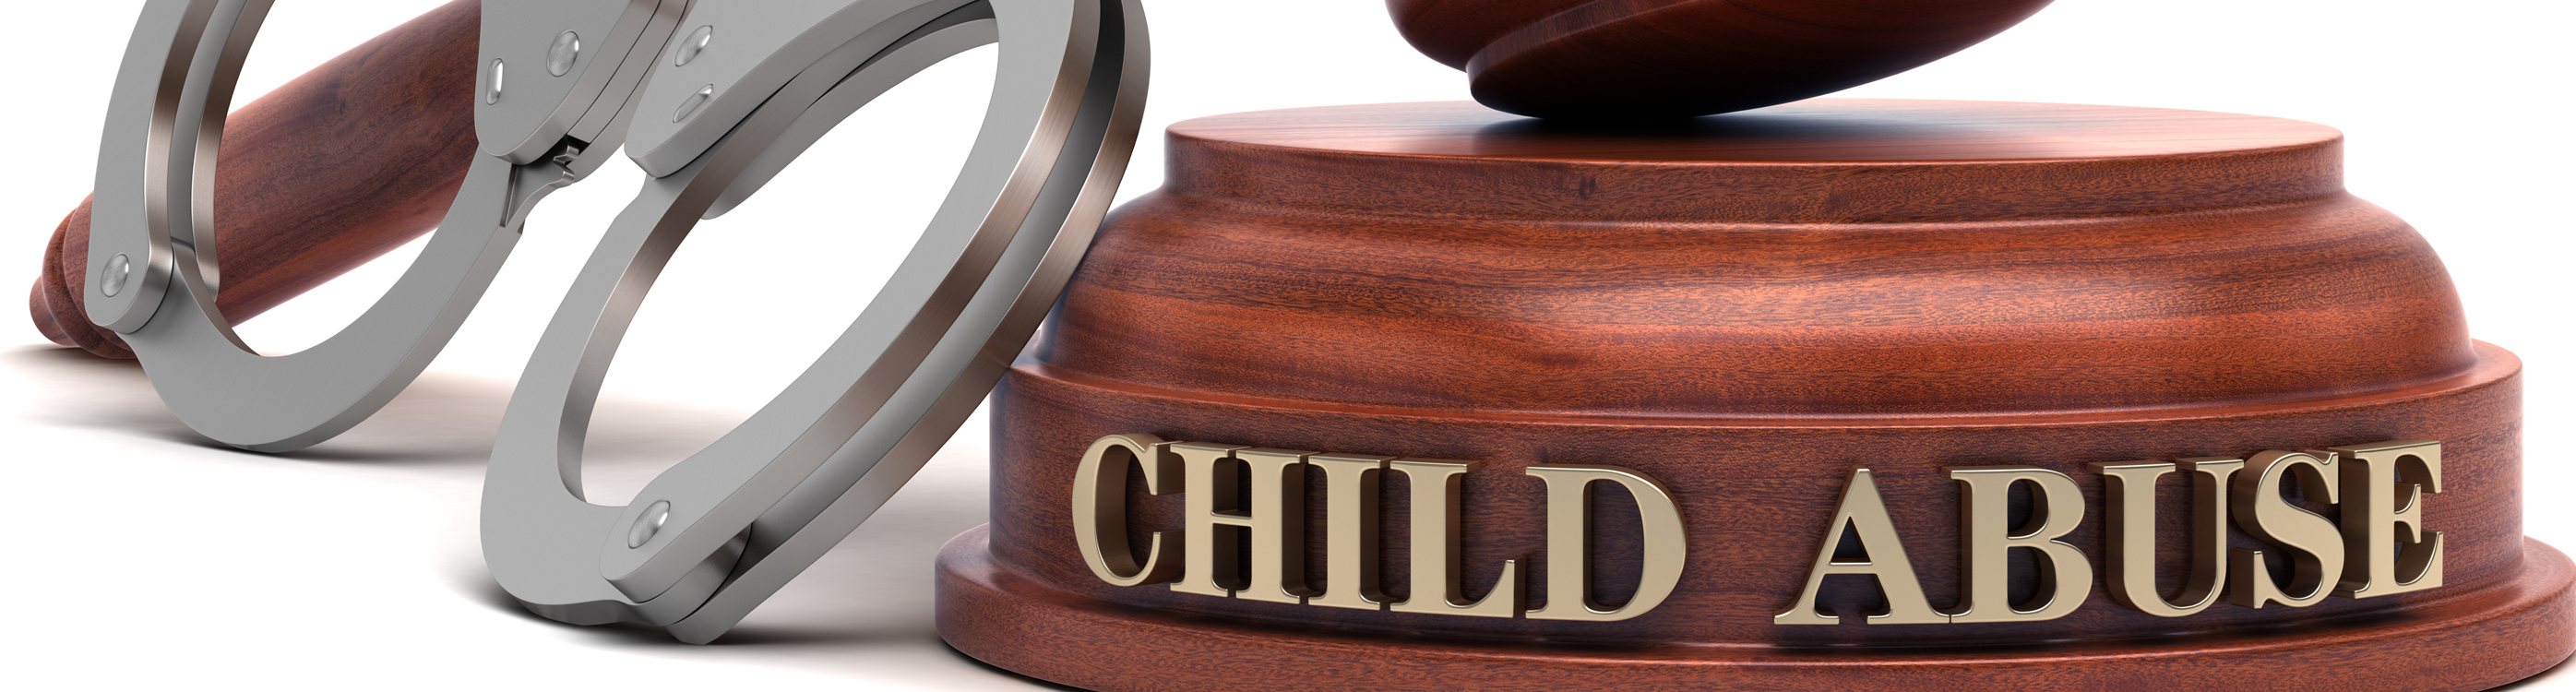 How a Criminal Defense Attorney Can Help if You Are Facing Child Abuse Charges